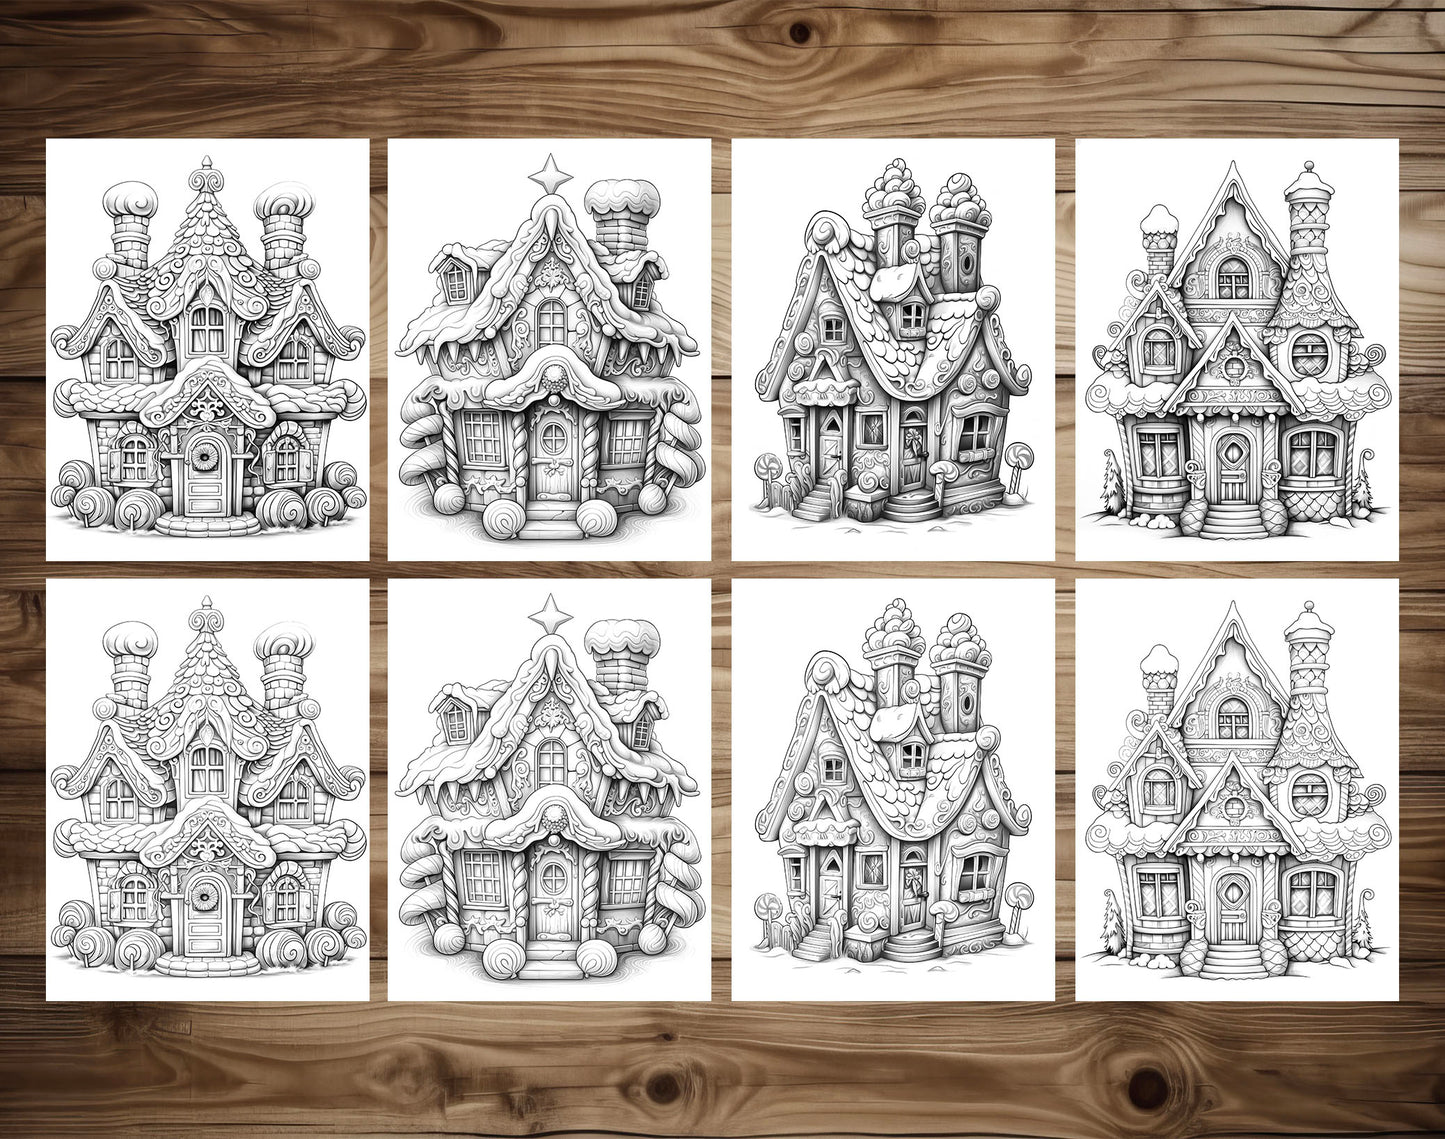 50 Gingerbread House Grayscale Coloring Pages - Instant Download - Printable Dark/Light